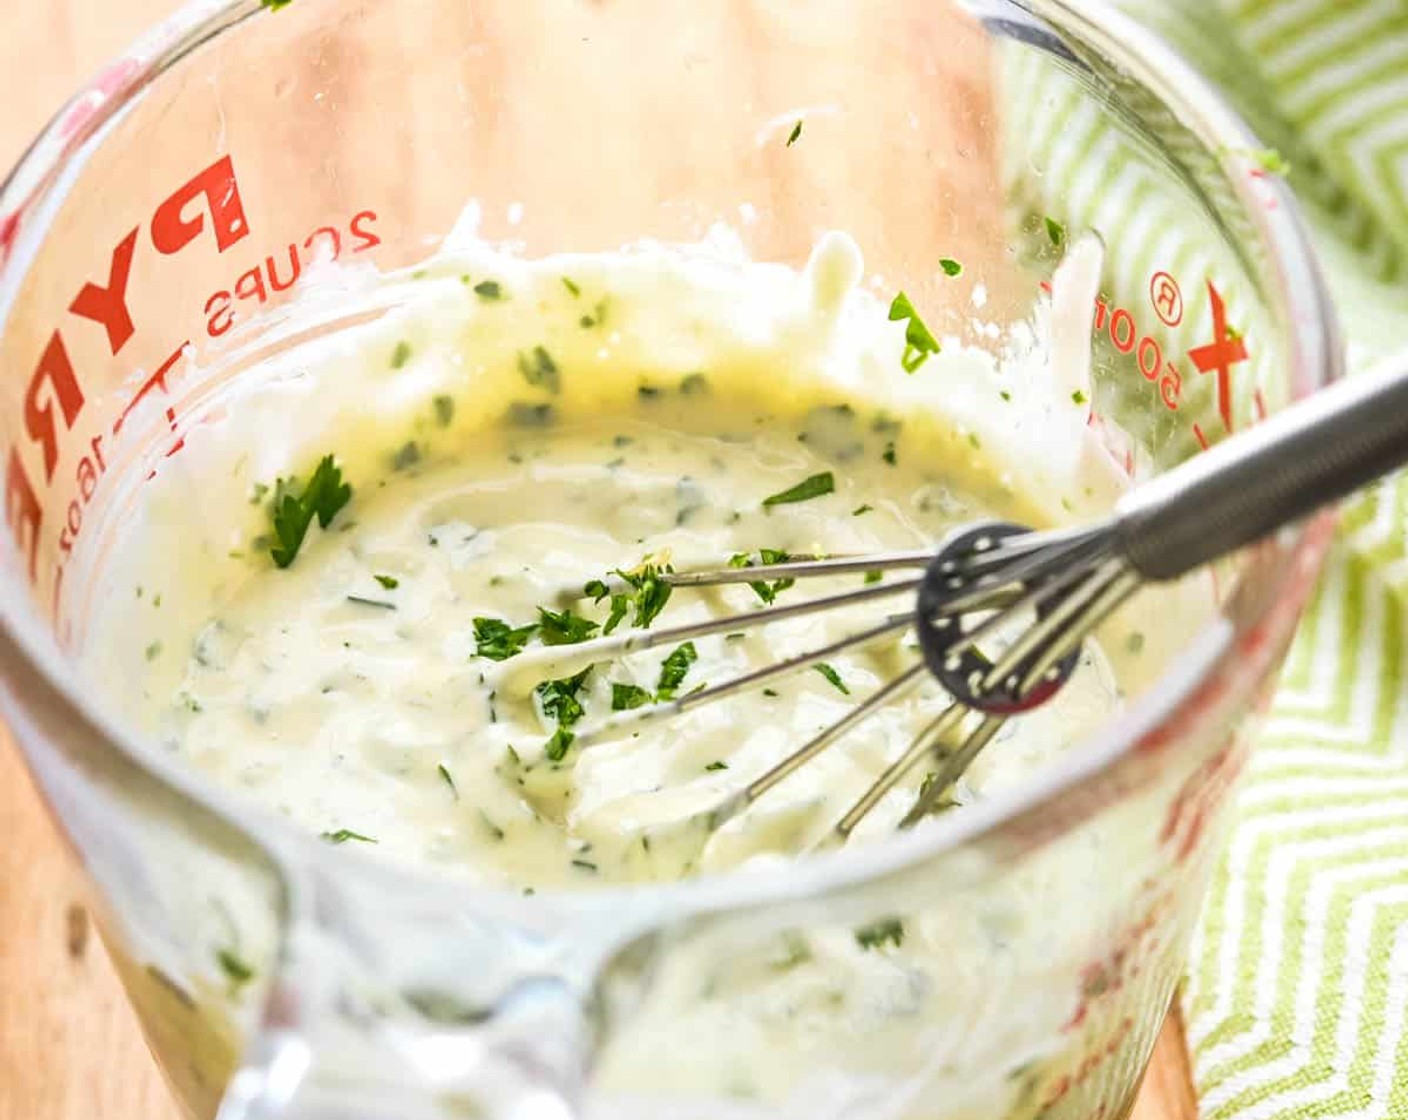 step 2 Measure out about 3/4 cup of Mayonnaise (3/4 cup) in a 2-cup glass measure. Add the zest and juice from the Lime (1), Habanero Hot Sauce (1 Tbsp), Freshly Ground Black Pepper (1/2 tsp), and Fresh Cilantro (1/2 cup). Whisk to combine.